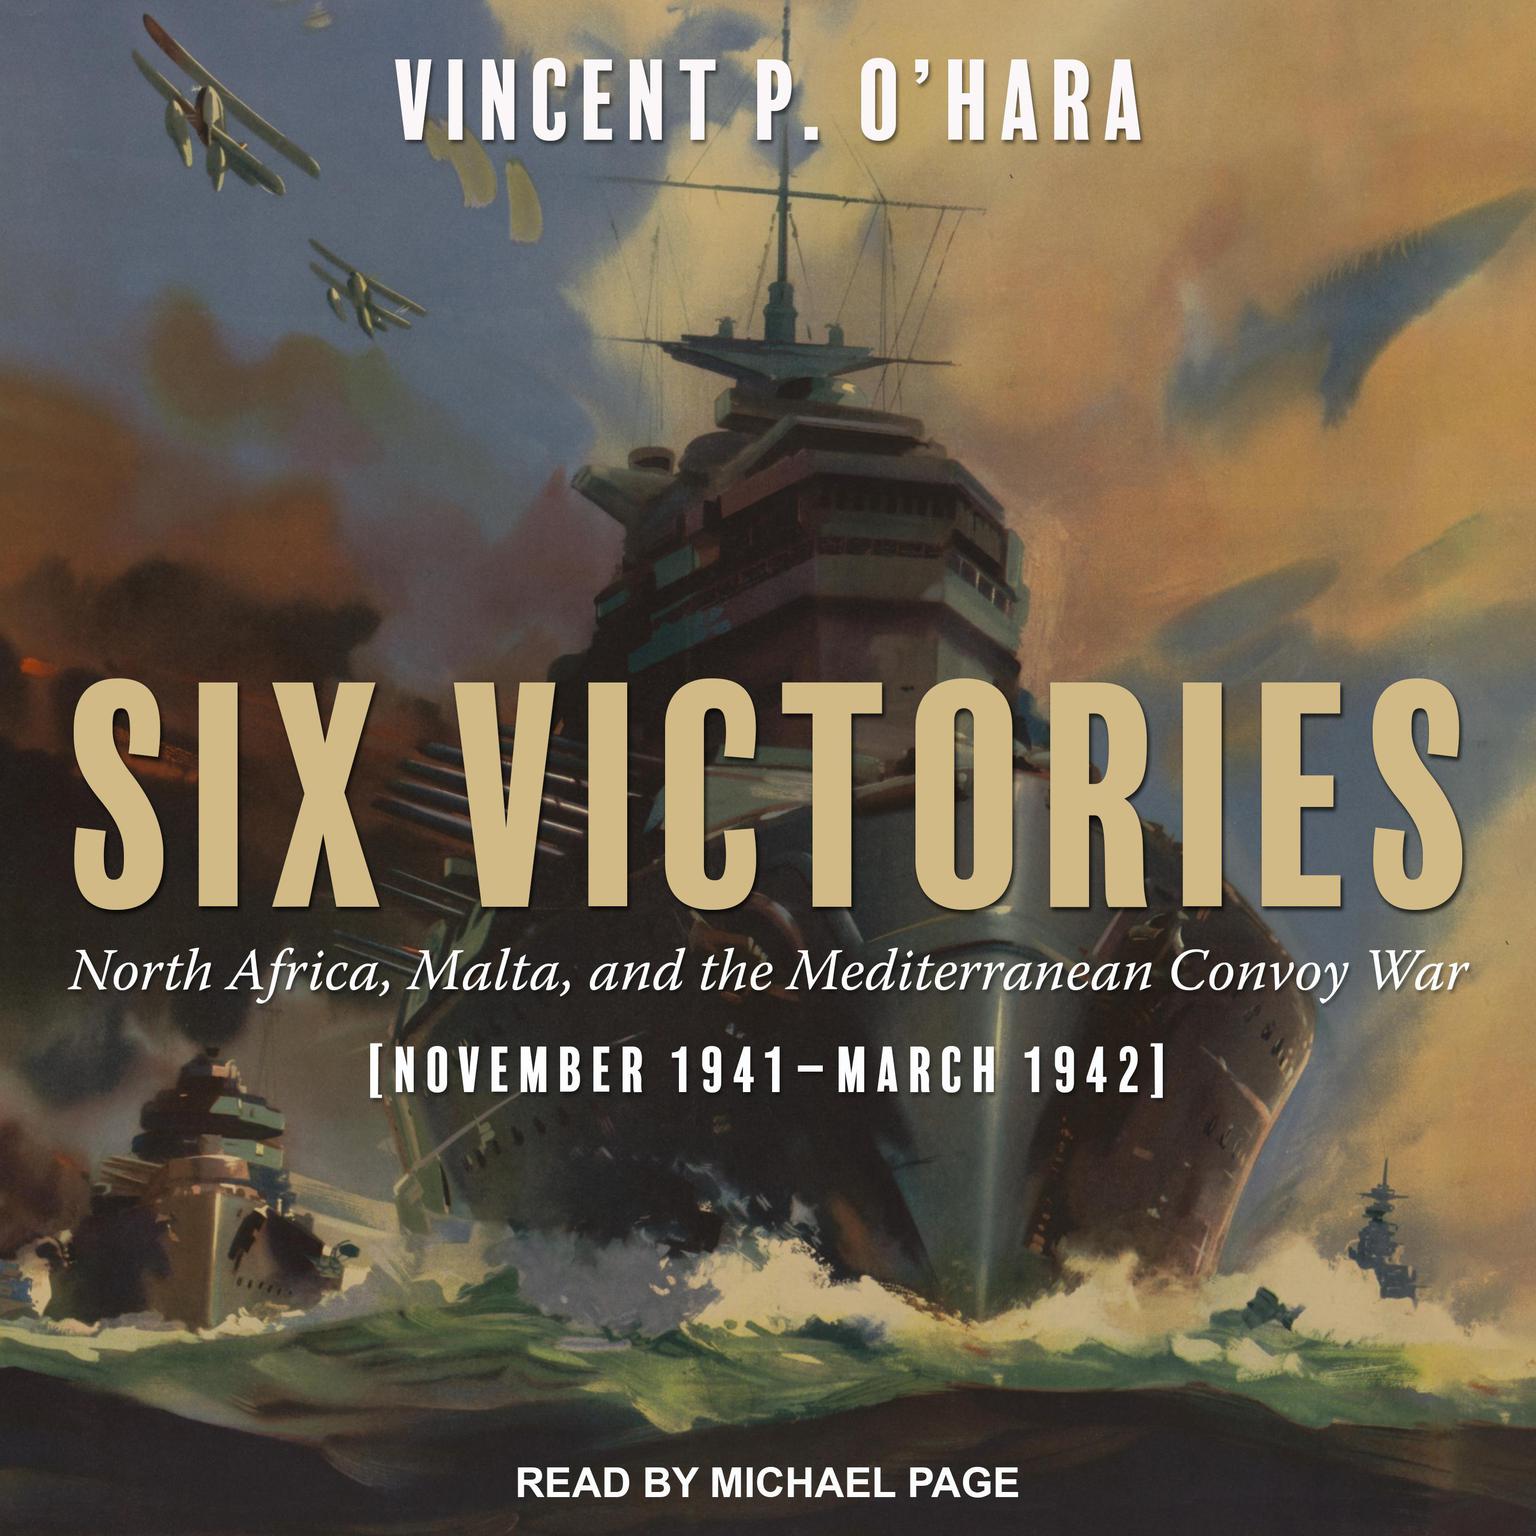 Six Victories: North Africa Malta and the Mediterranean Convoy War November 1941-March 1942 Audiobook, by Vincent O'Hara